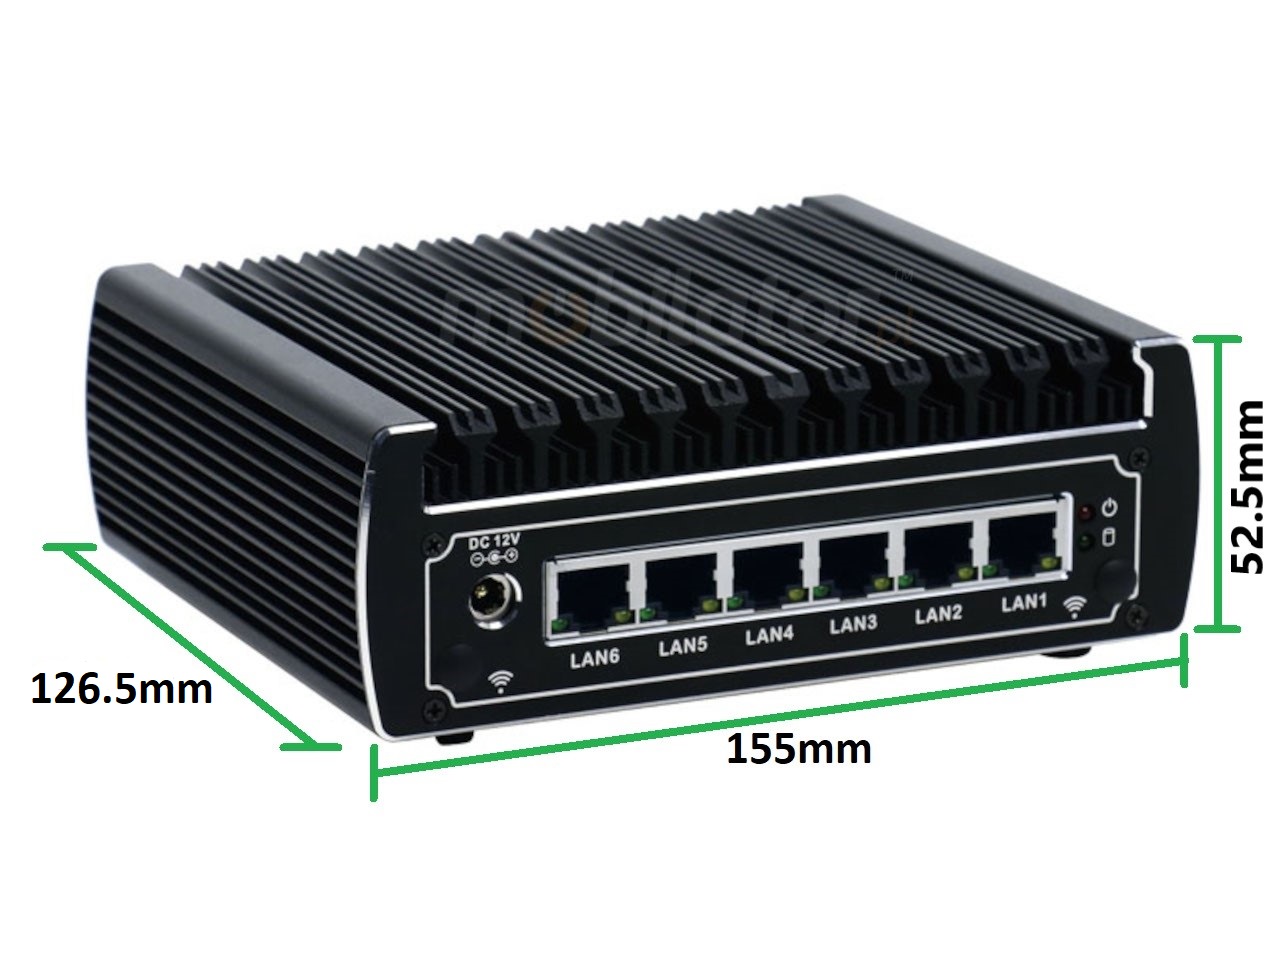  IBOX N133 v.17, size, industrial small fast reliable fanless industrial small LAN INTEL i3 HDD SSD DDR4 WIFI BLUETOOTH